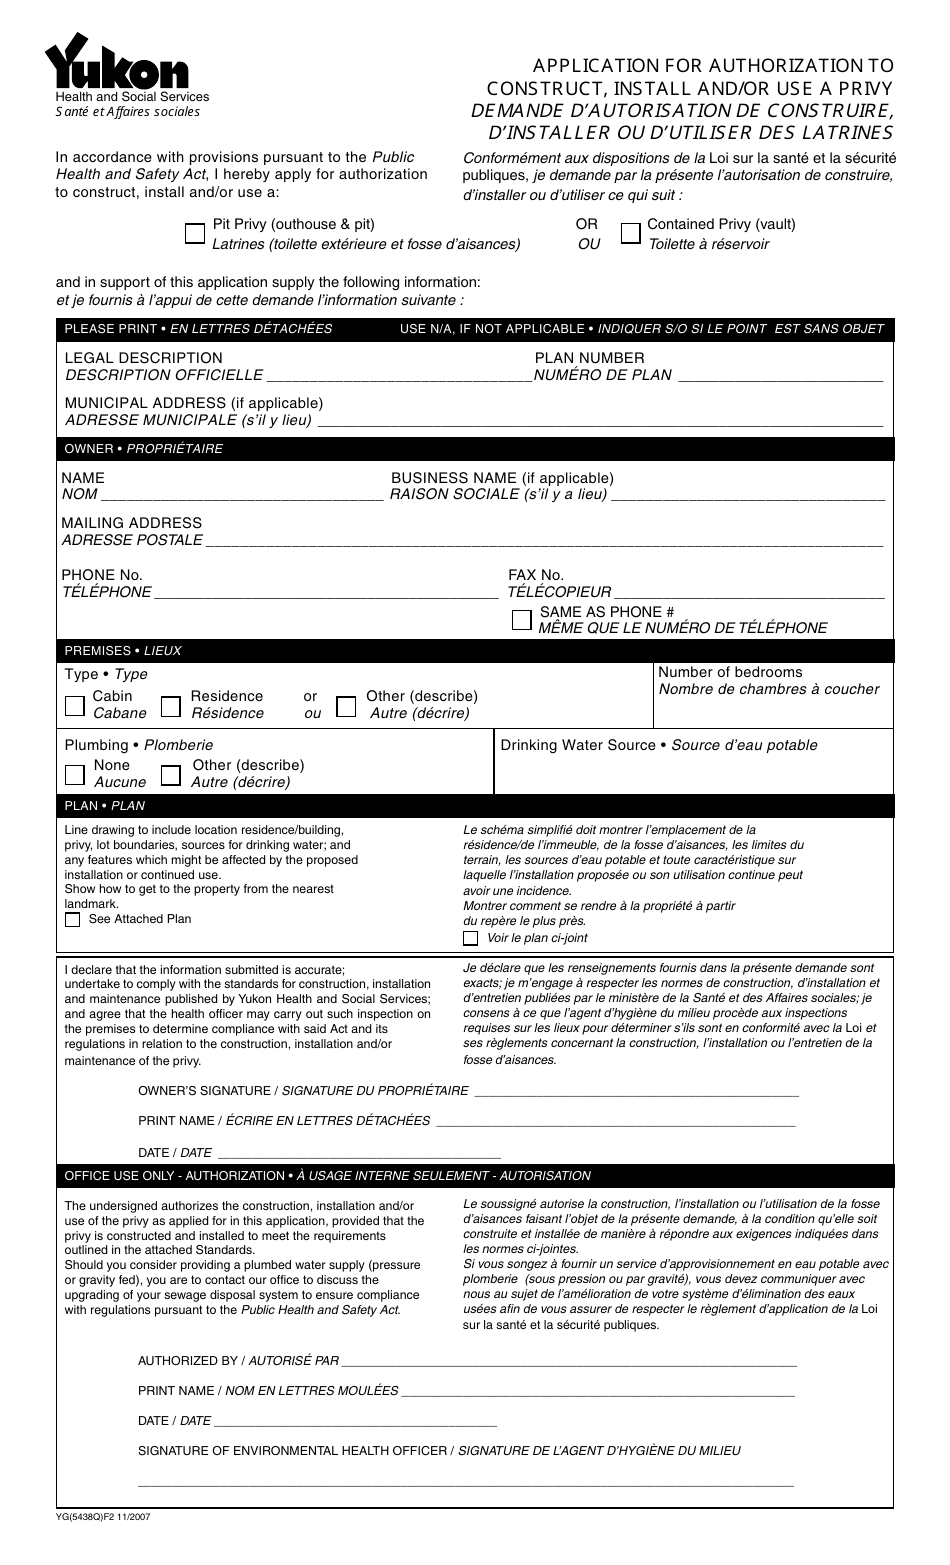 Form YG5438 Application for Authorization to Construct, Install and / or Use a Privy - Yukon, Canada (English / French), Page 1